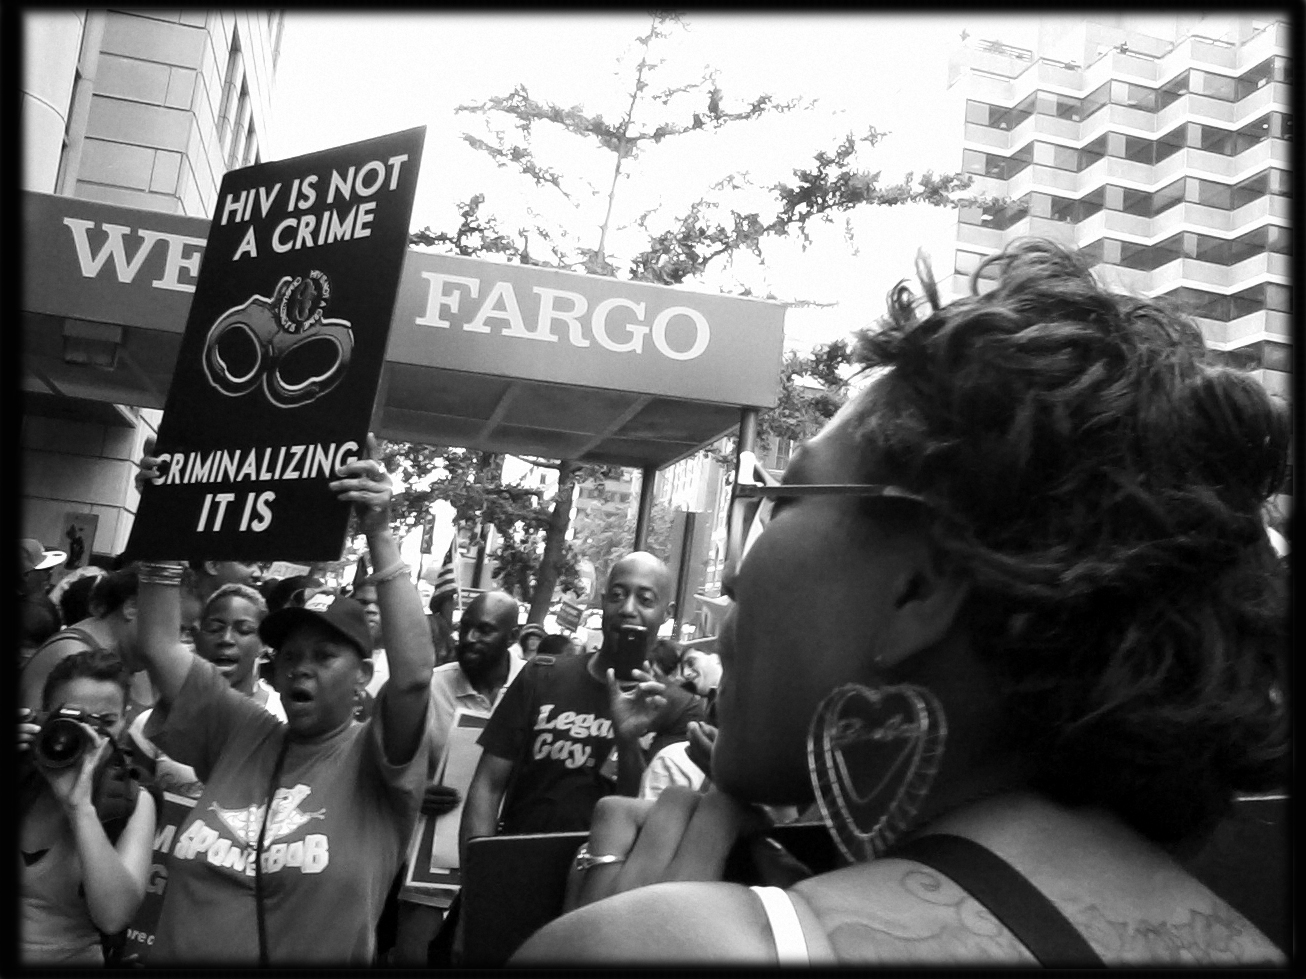 A photograph shows people protesting outside of Wells Fargo bank. One person holds a sign that reads “HIV IS NOT A CRIME - CRIMINALIZING IT IS.” There is a drawing of handcuffs on the sign.